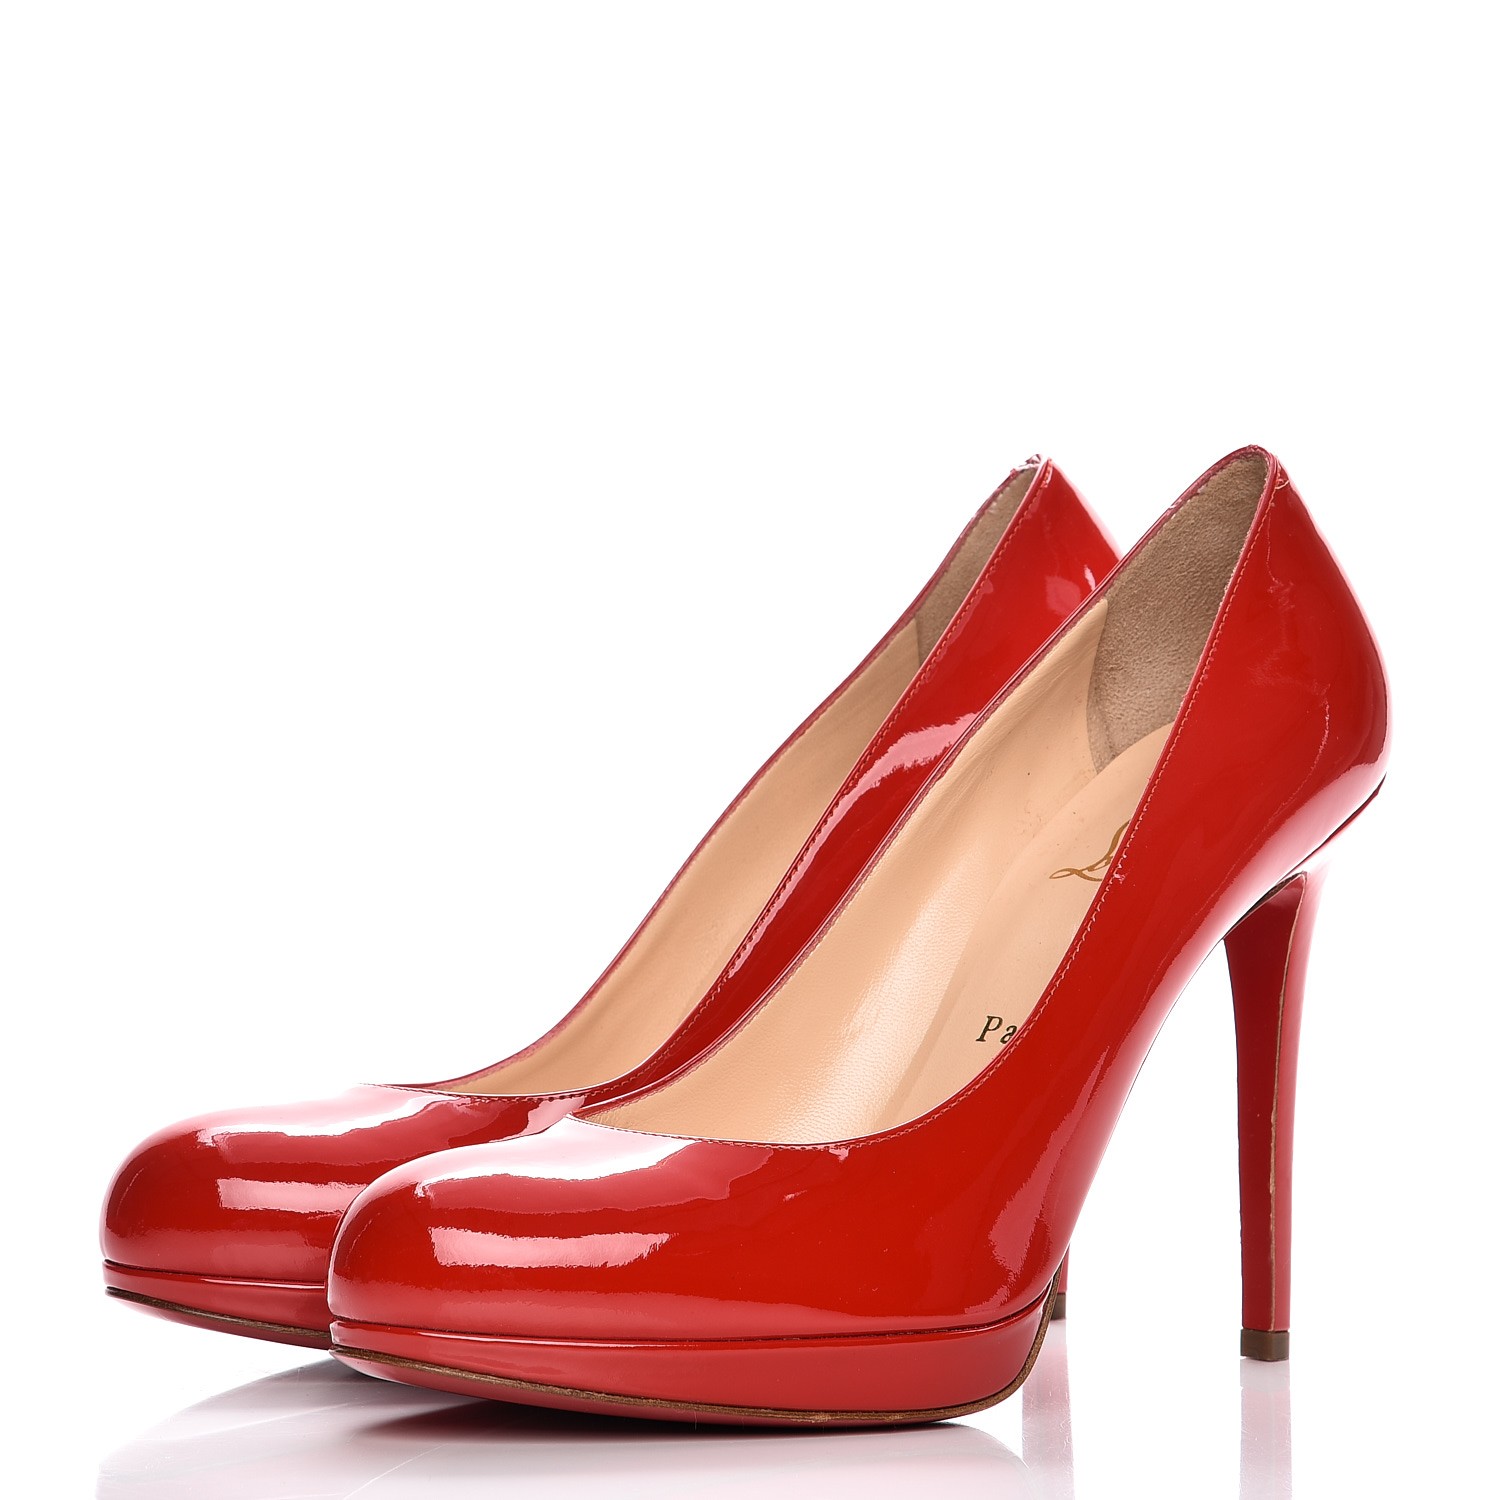 CHRISTIAN LOUBOUTIN Patent New Simple Pumps 38.5 Red 218247 | FASHIONPHILE